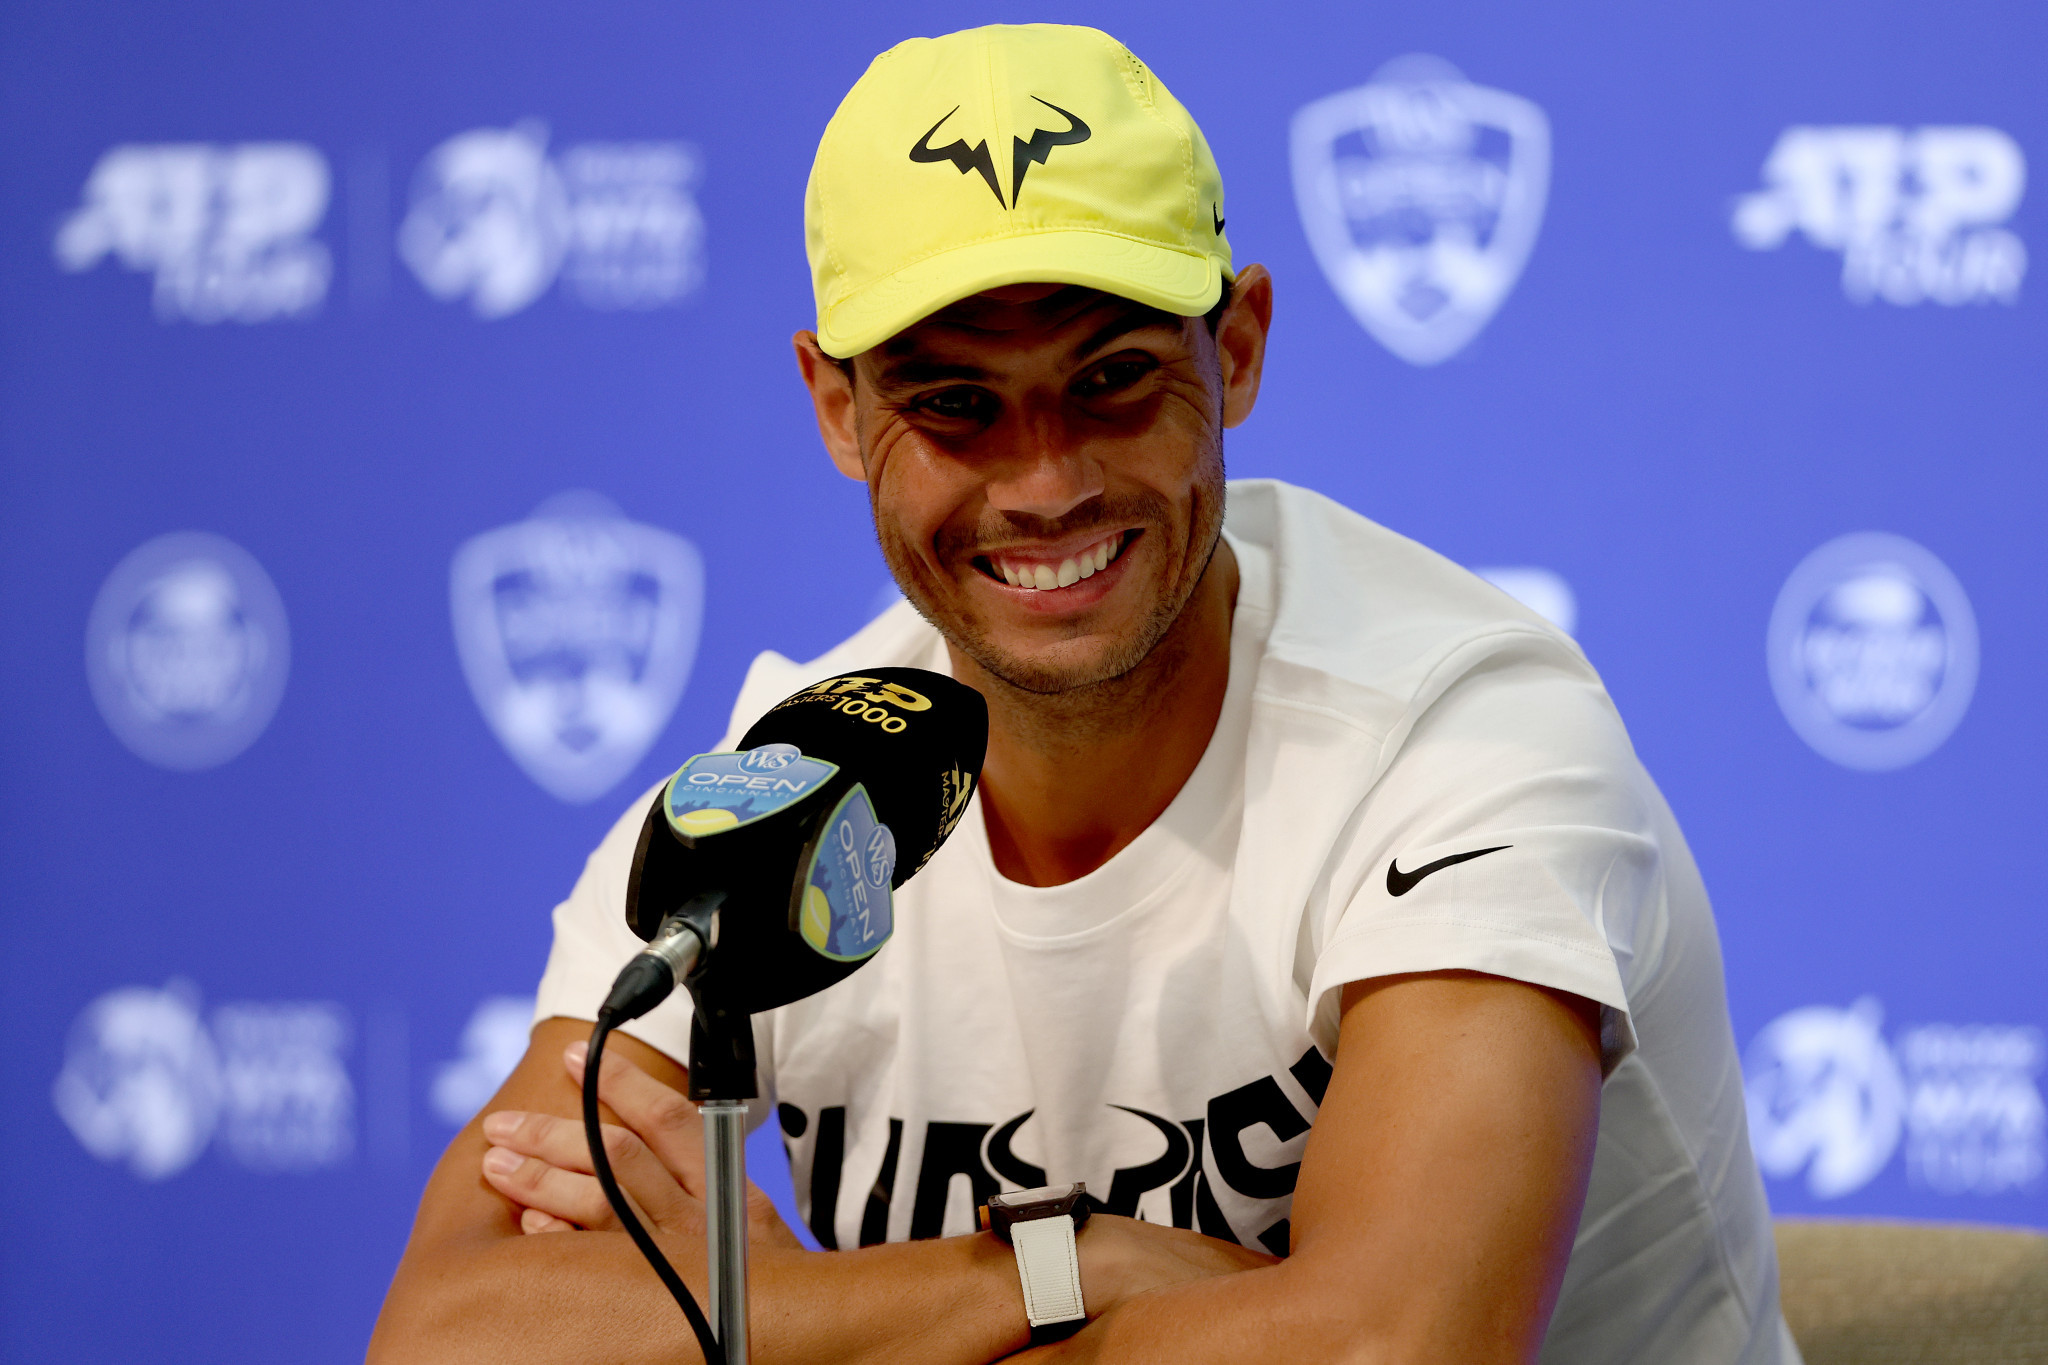 Twenty-two time Grand Slam singles winner Rafael Nadal is set to take part in the exhibition event ©Getty Images